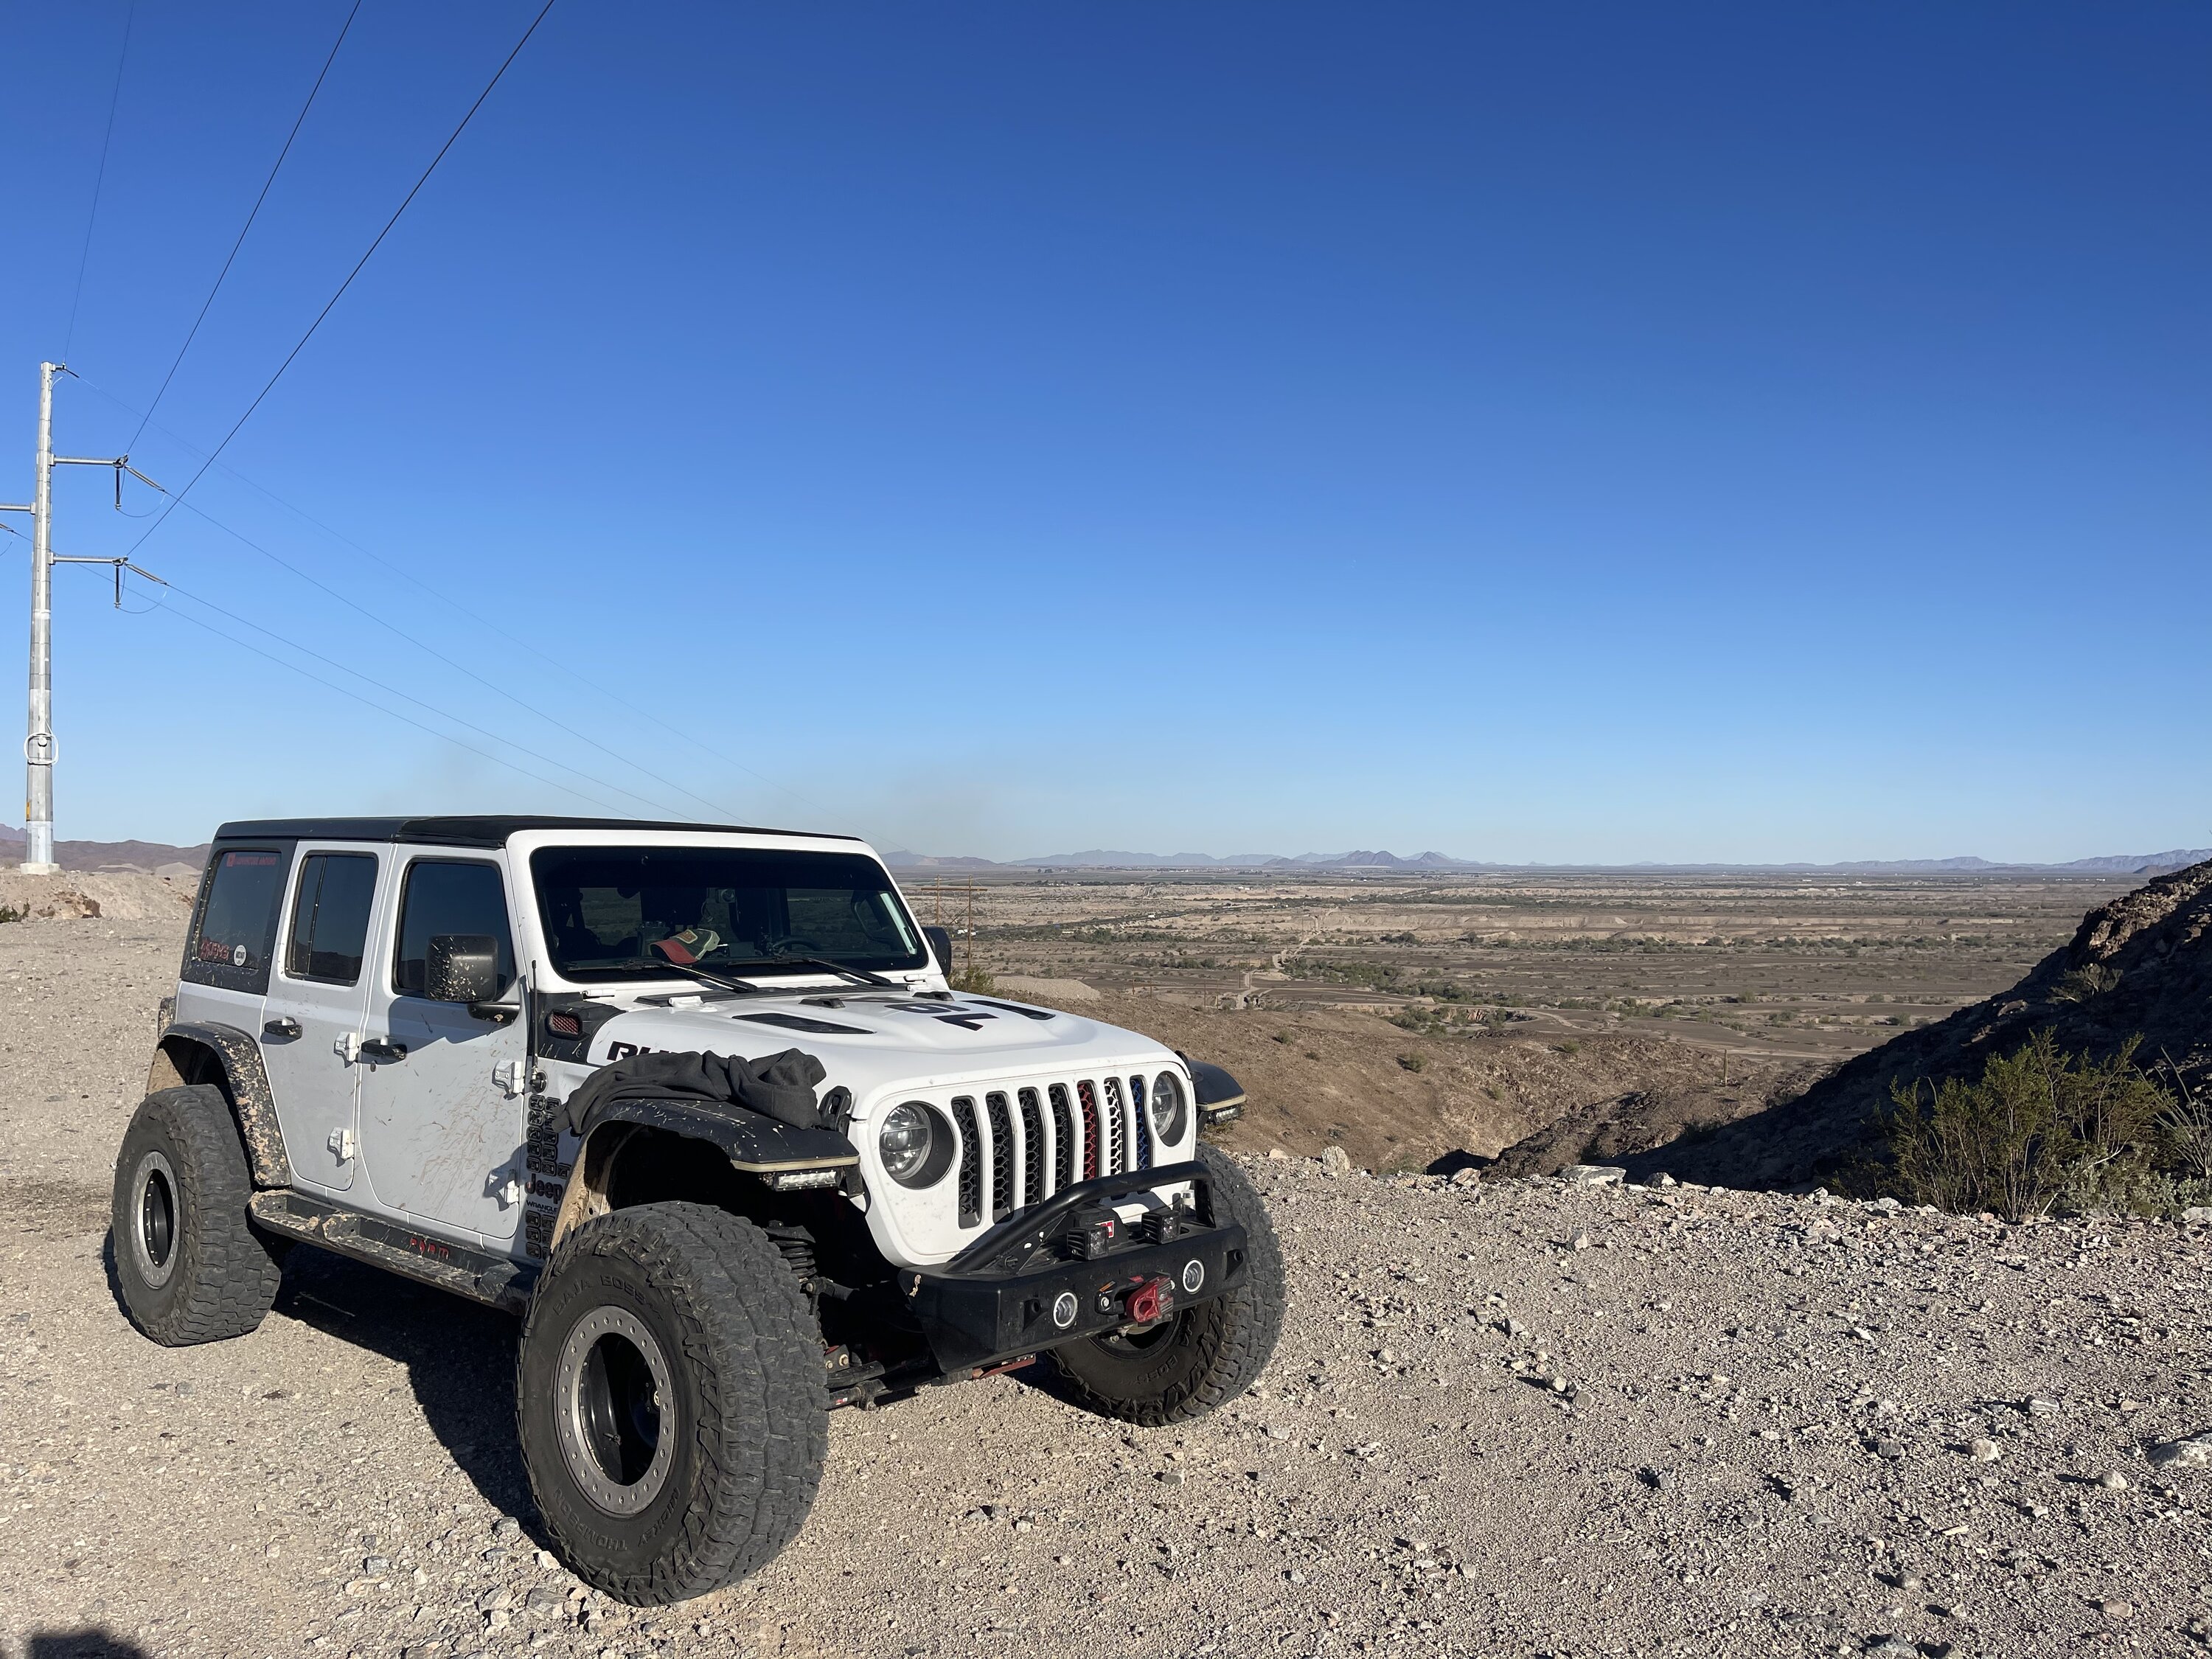 Jeep Wrangler JL Wandering the Southwest for Four or Five months of Wheeling. B4690DE3-8BE4-4519-B674-87AD5E72E4AD